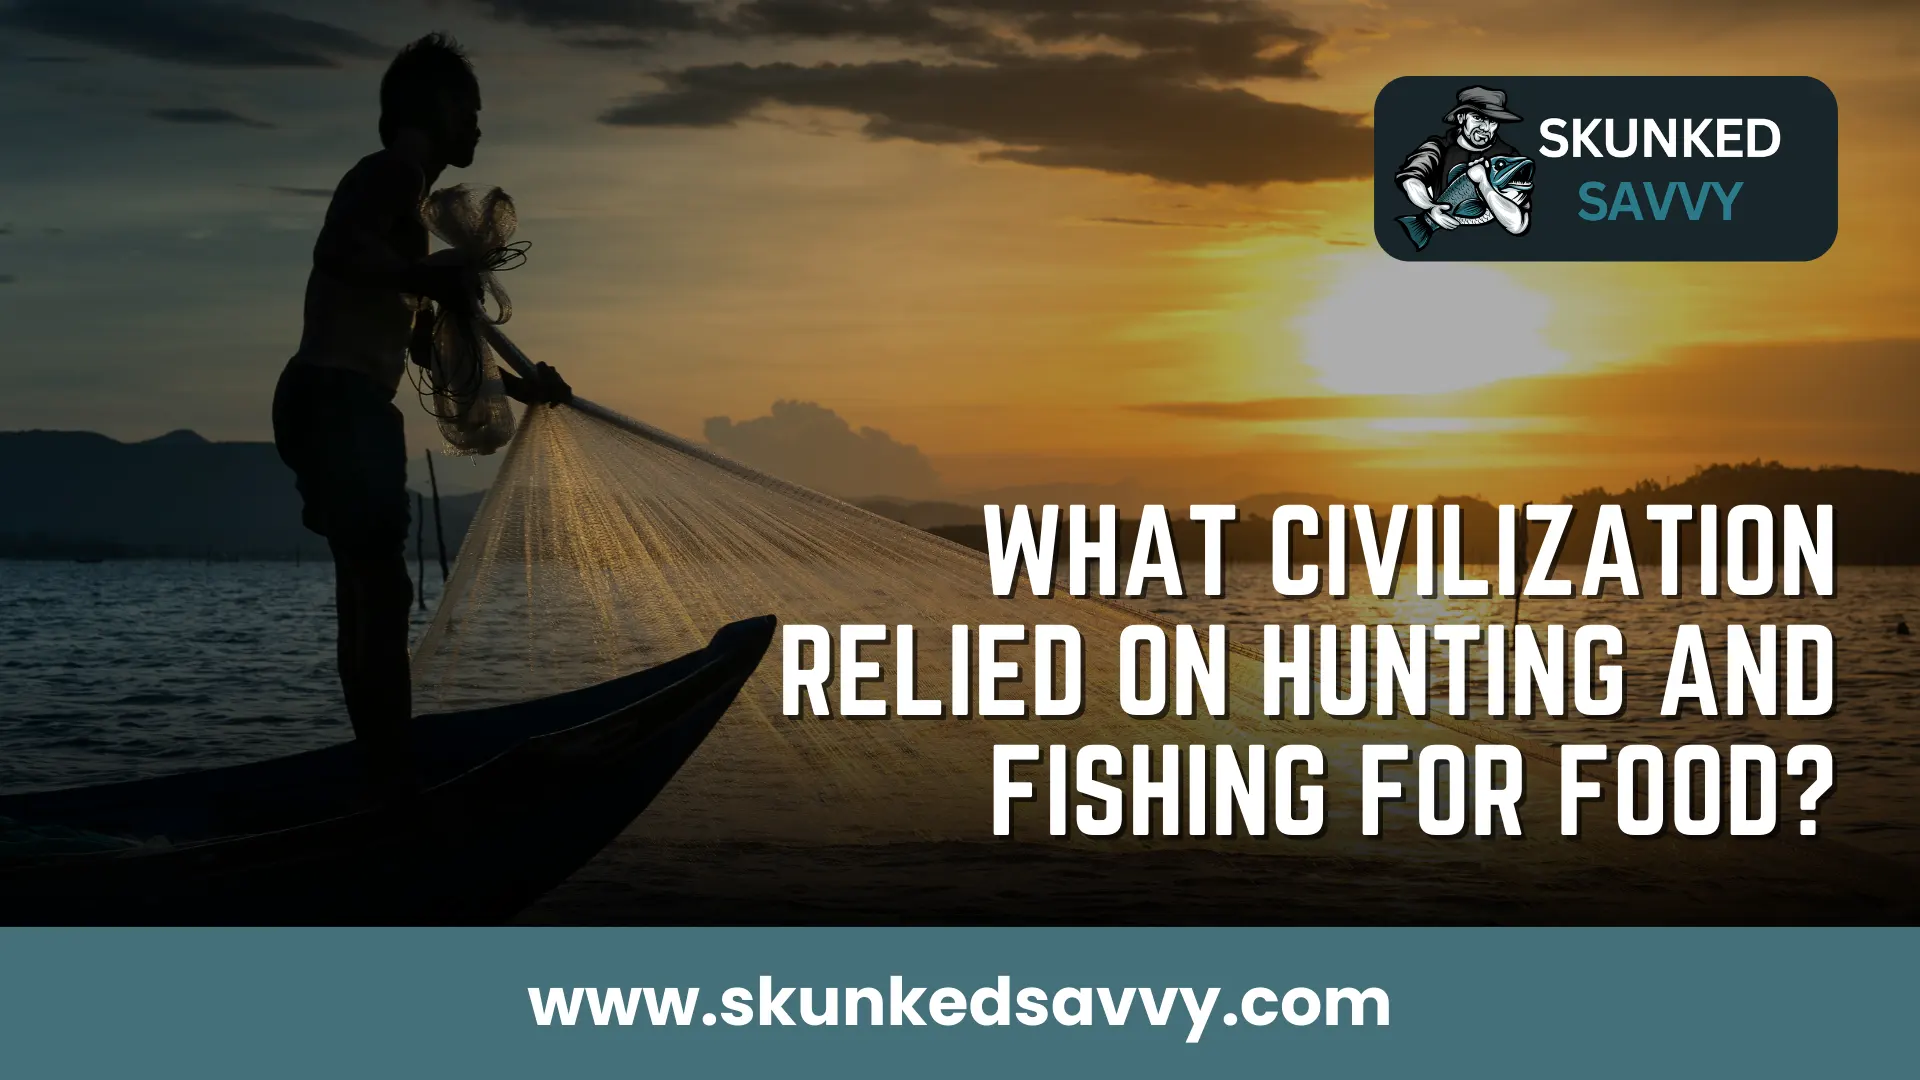 What Civilization Relied On Hunting And Fishing For Food